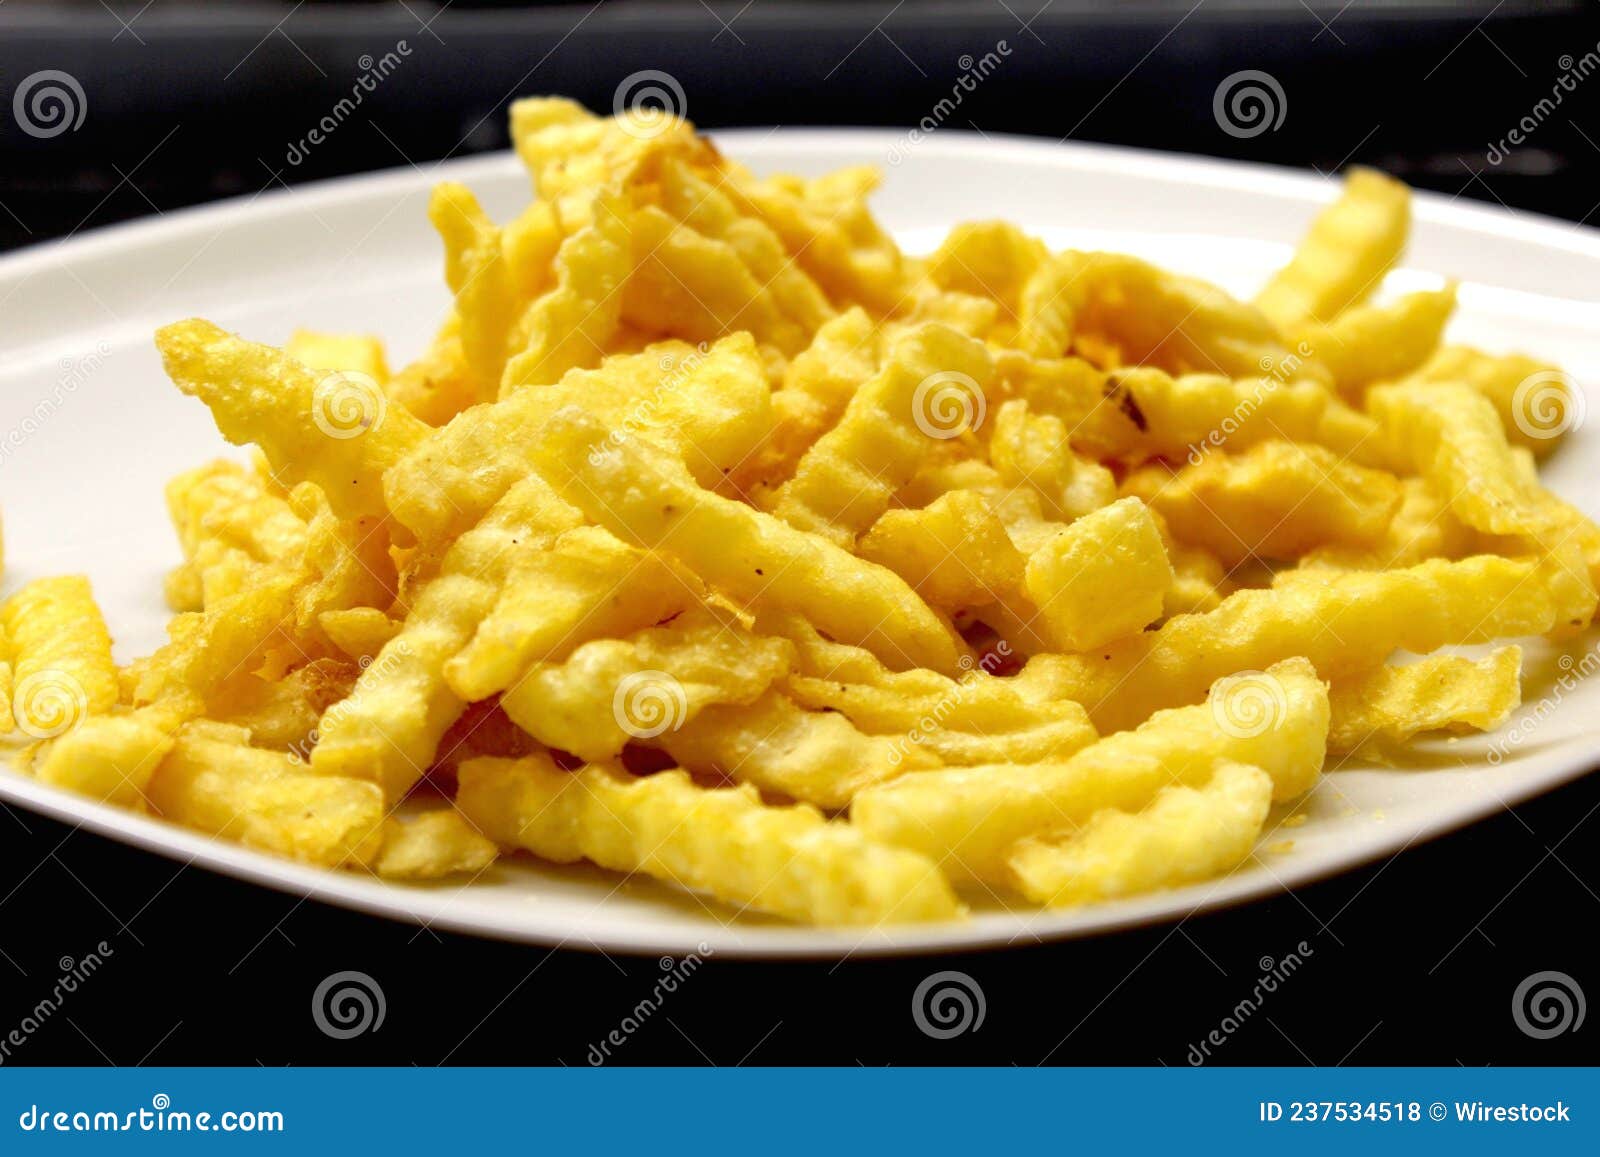 Closeup Shot of a Plate of Textured French Fries Stock Photo - Image of ...